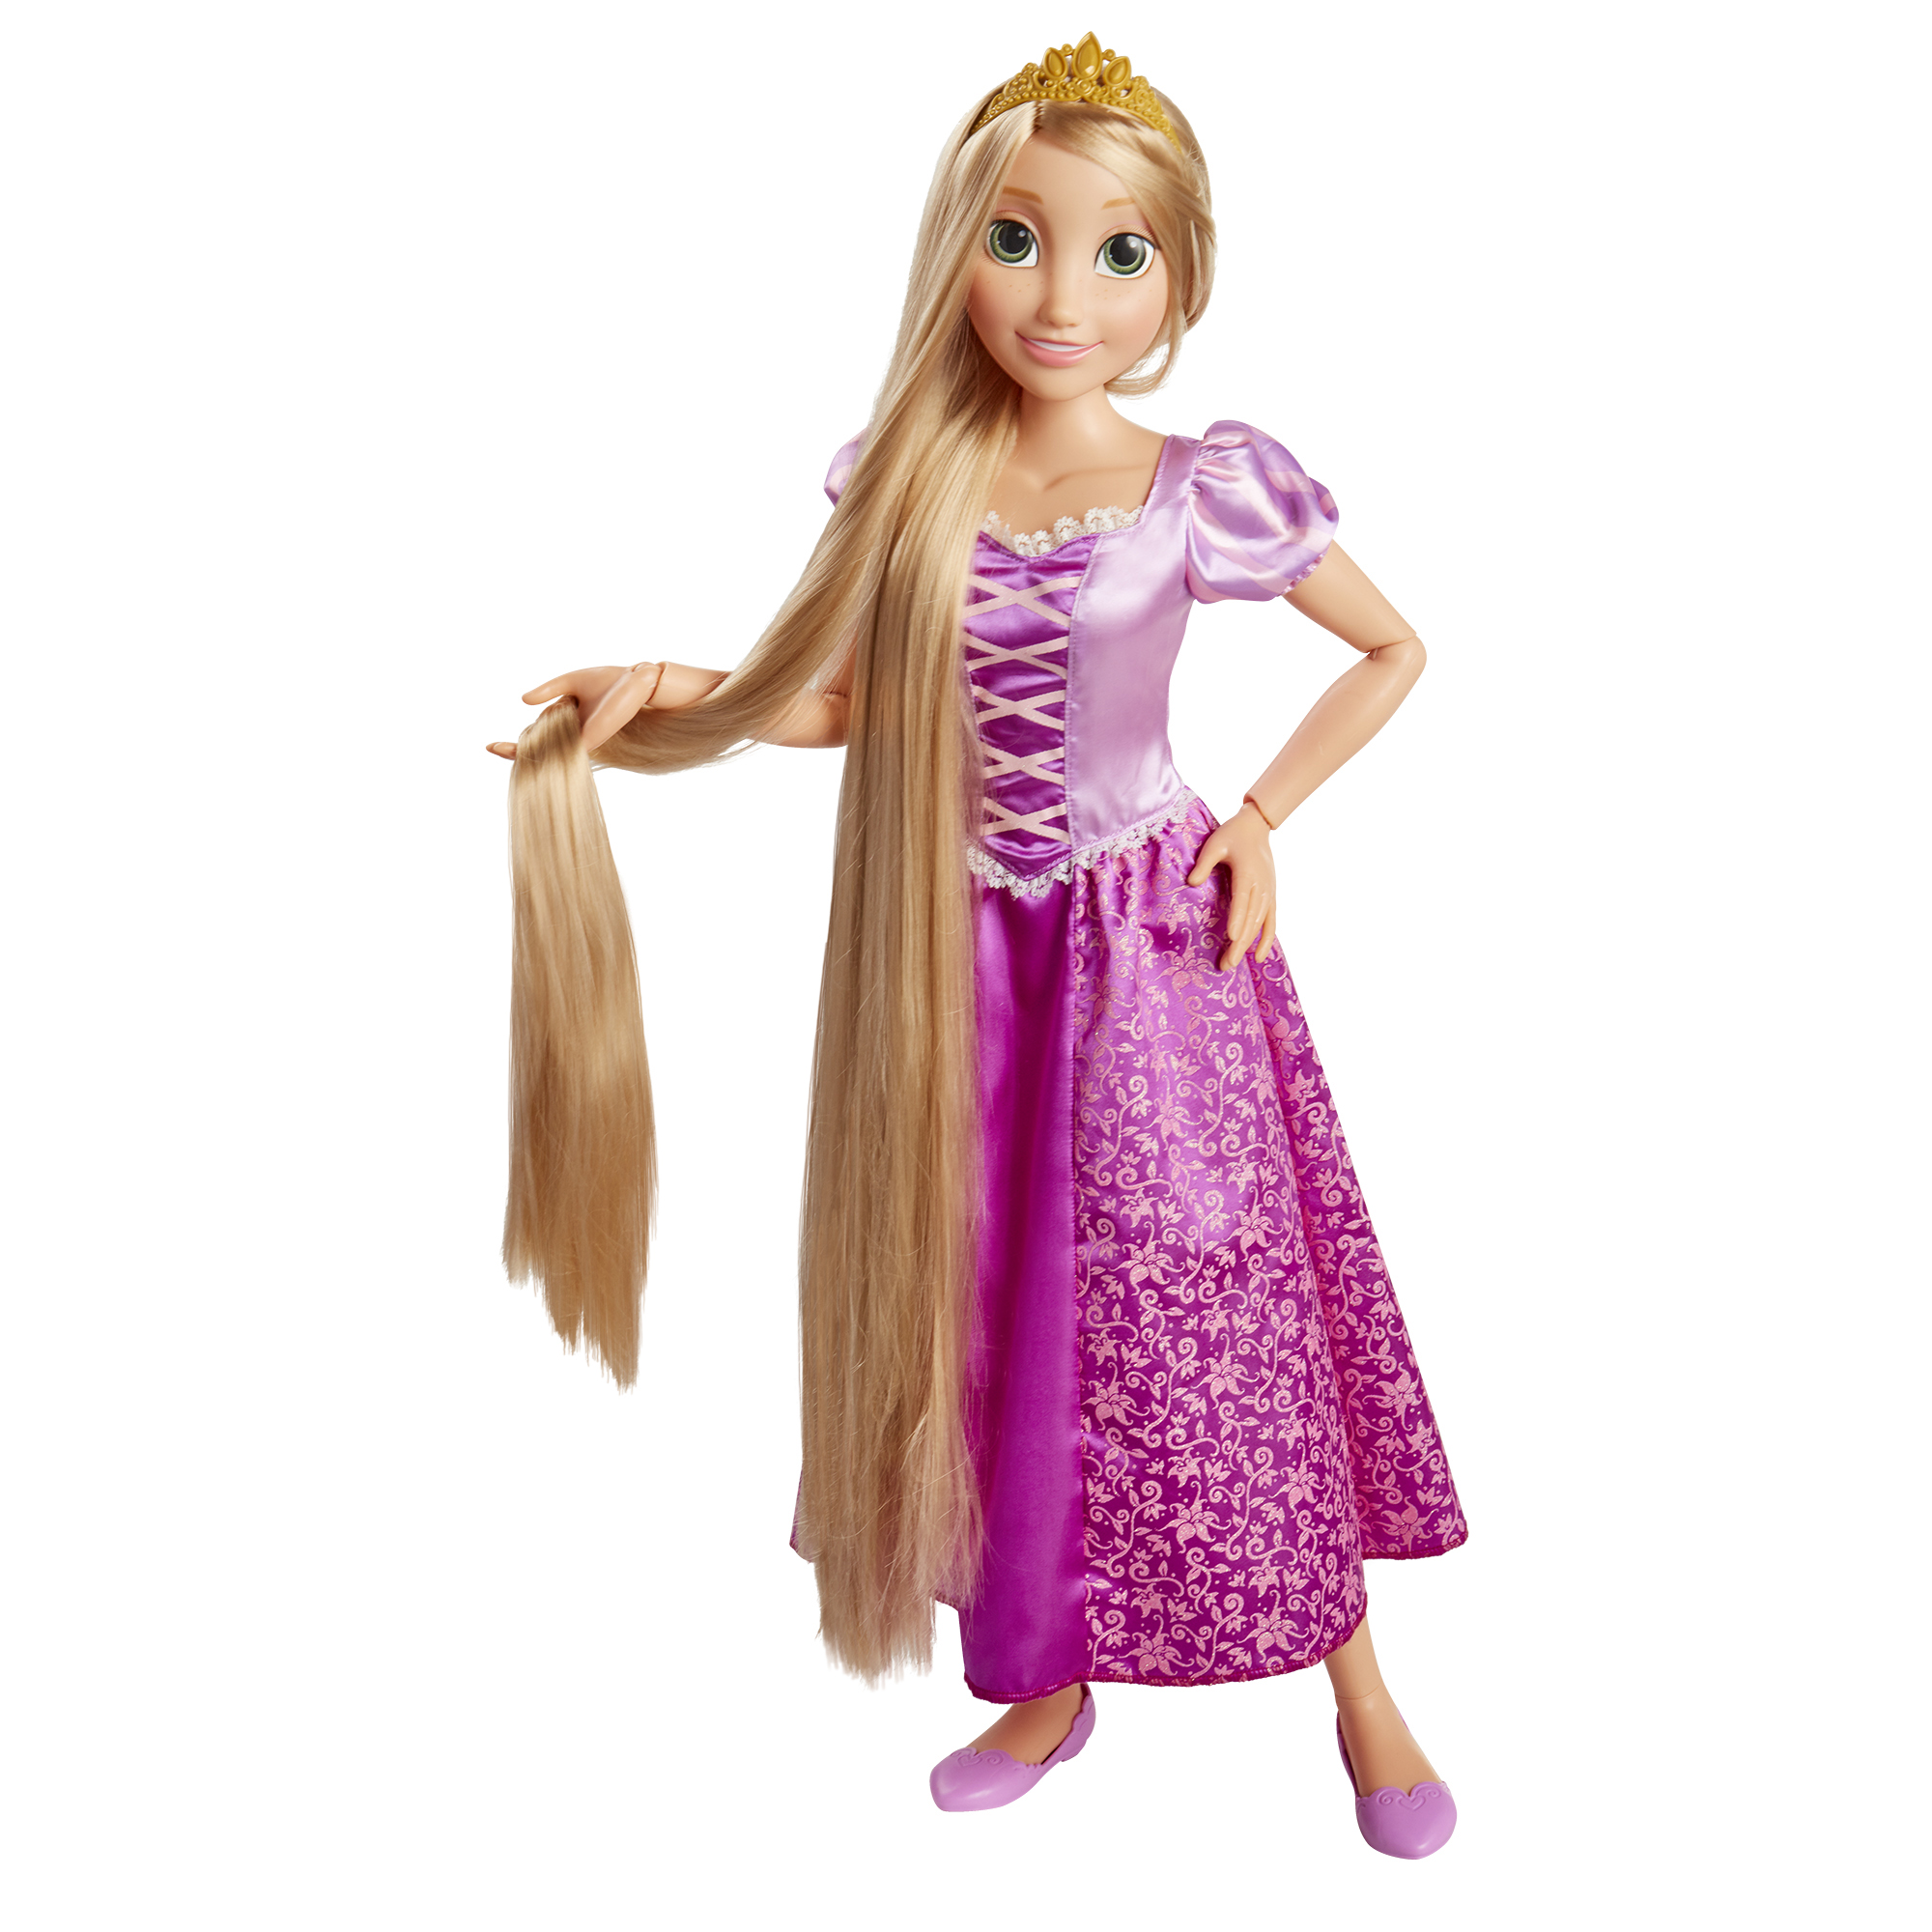 The Perfect Holiday Gift Ideas for Every Disney Princess